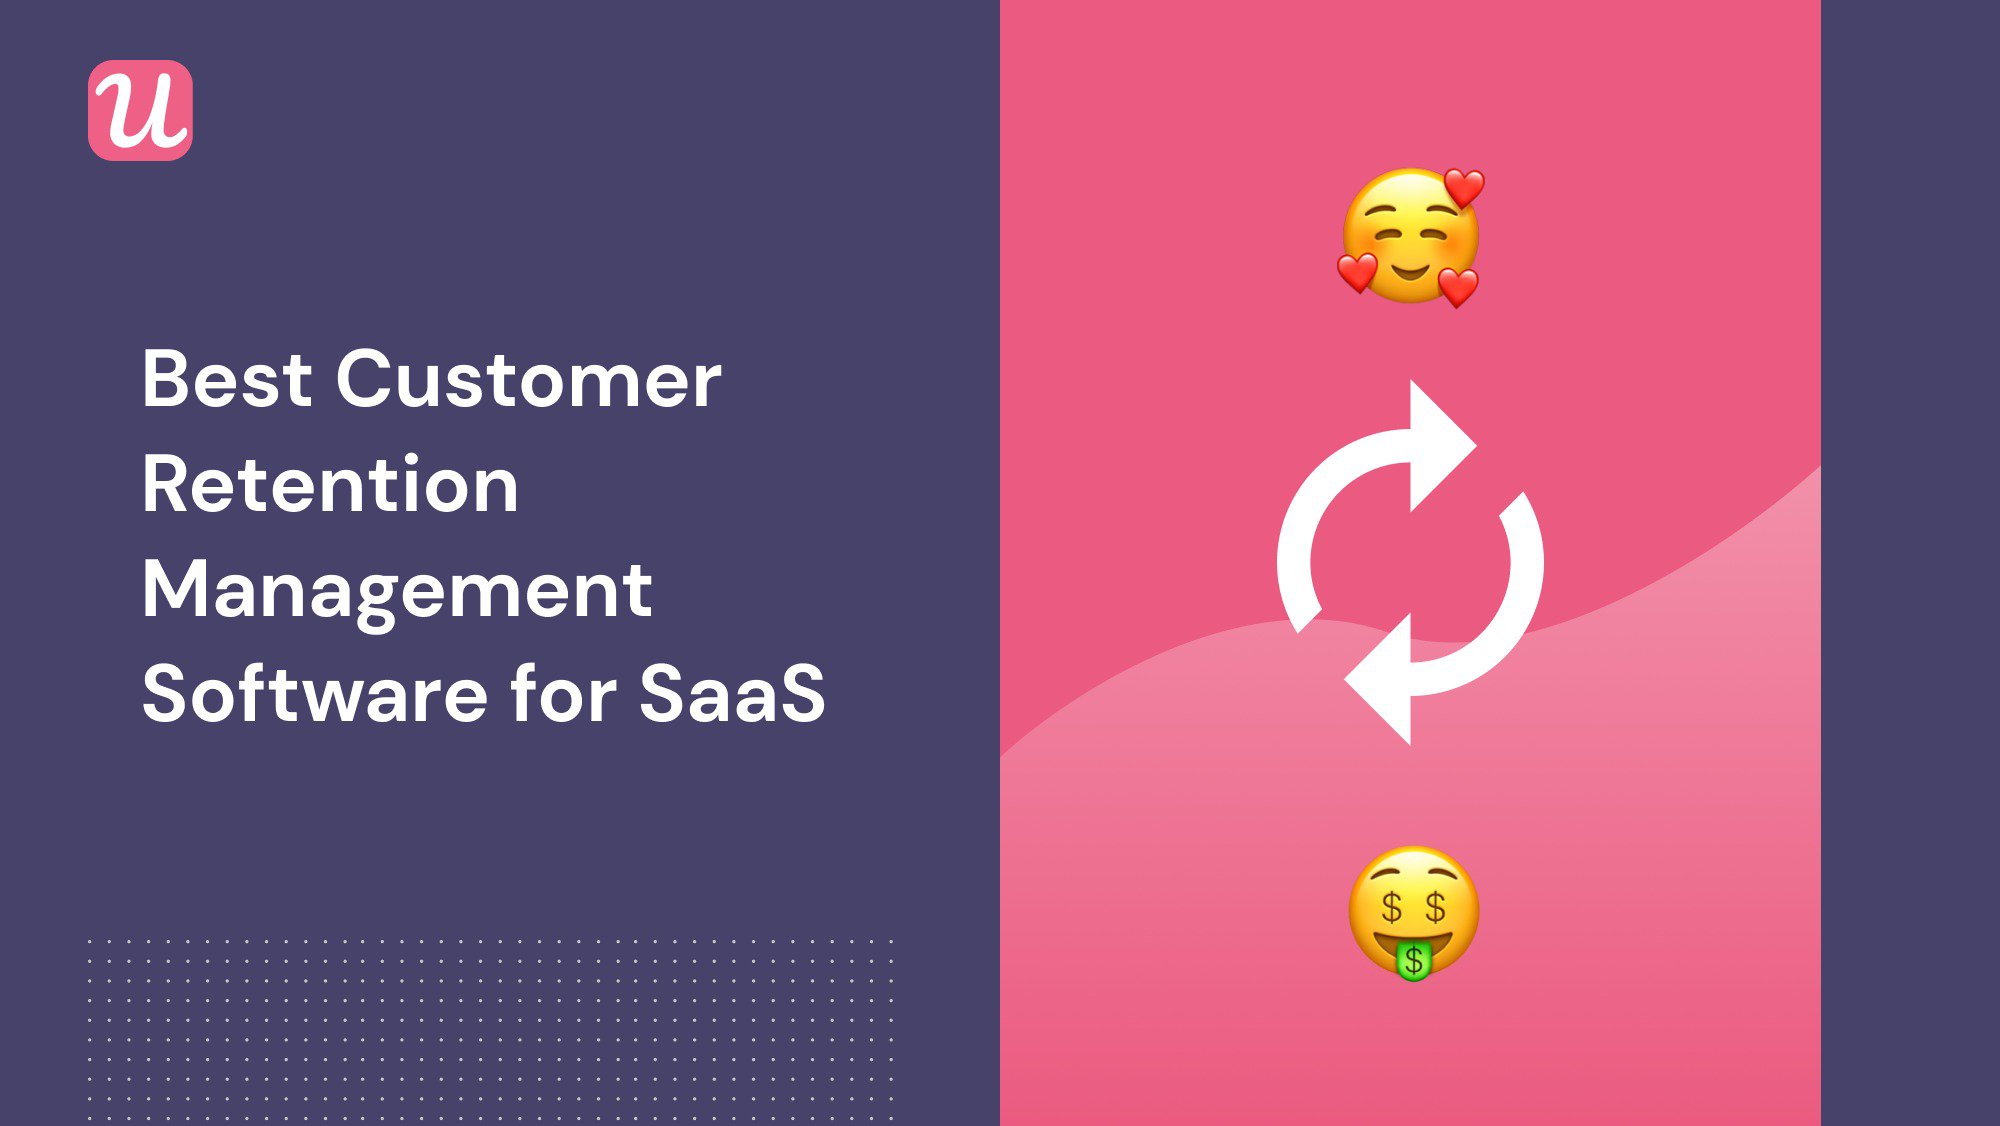 The Best Customer Retention Management Software of 2021